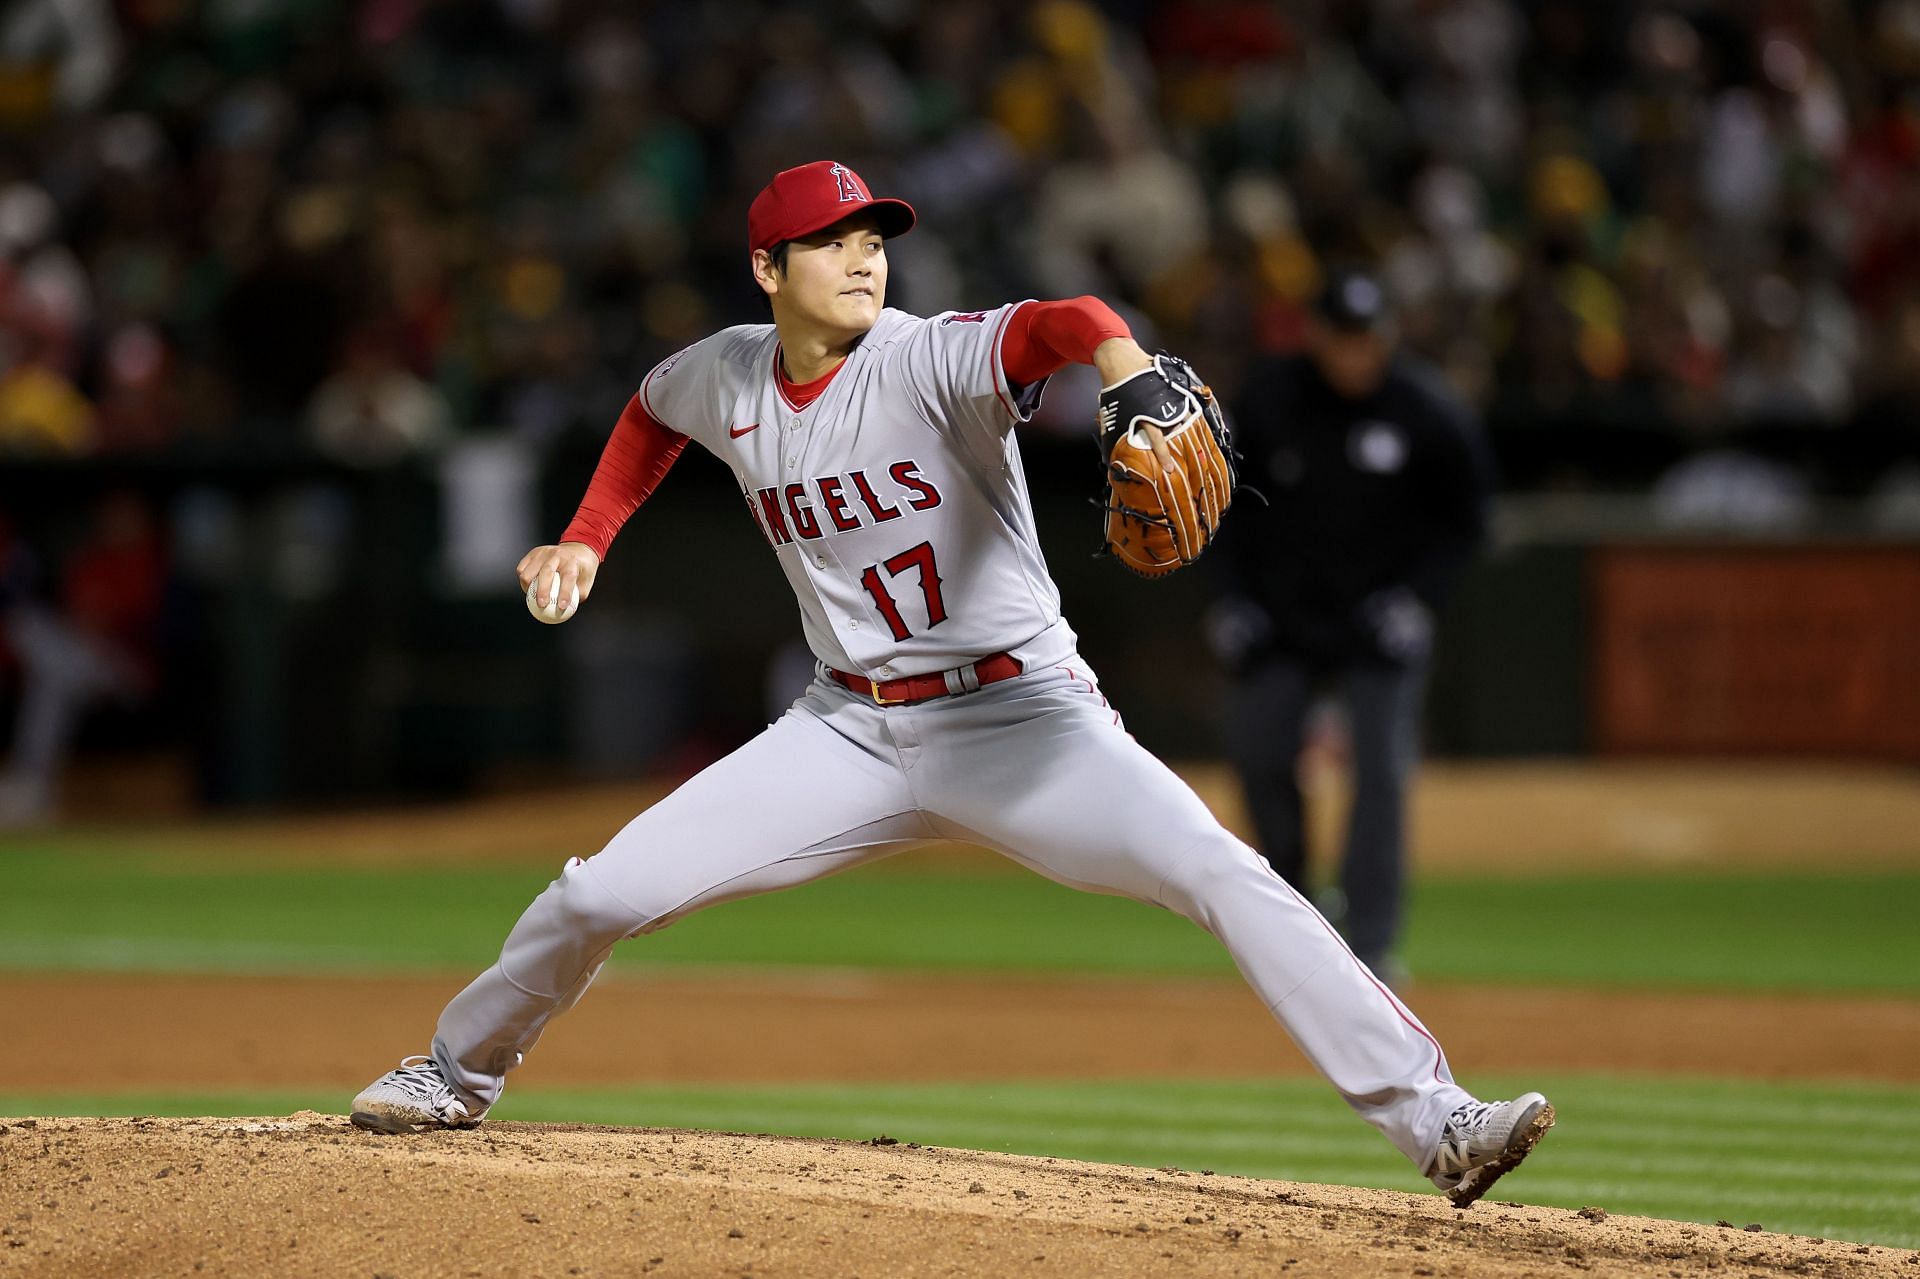 Shohei Ohtani of the Los Angeles Angels pitches against the Oakland Athletics on opening day at RingCentral Coliseum